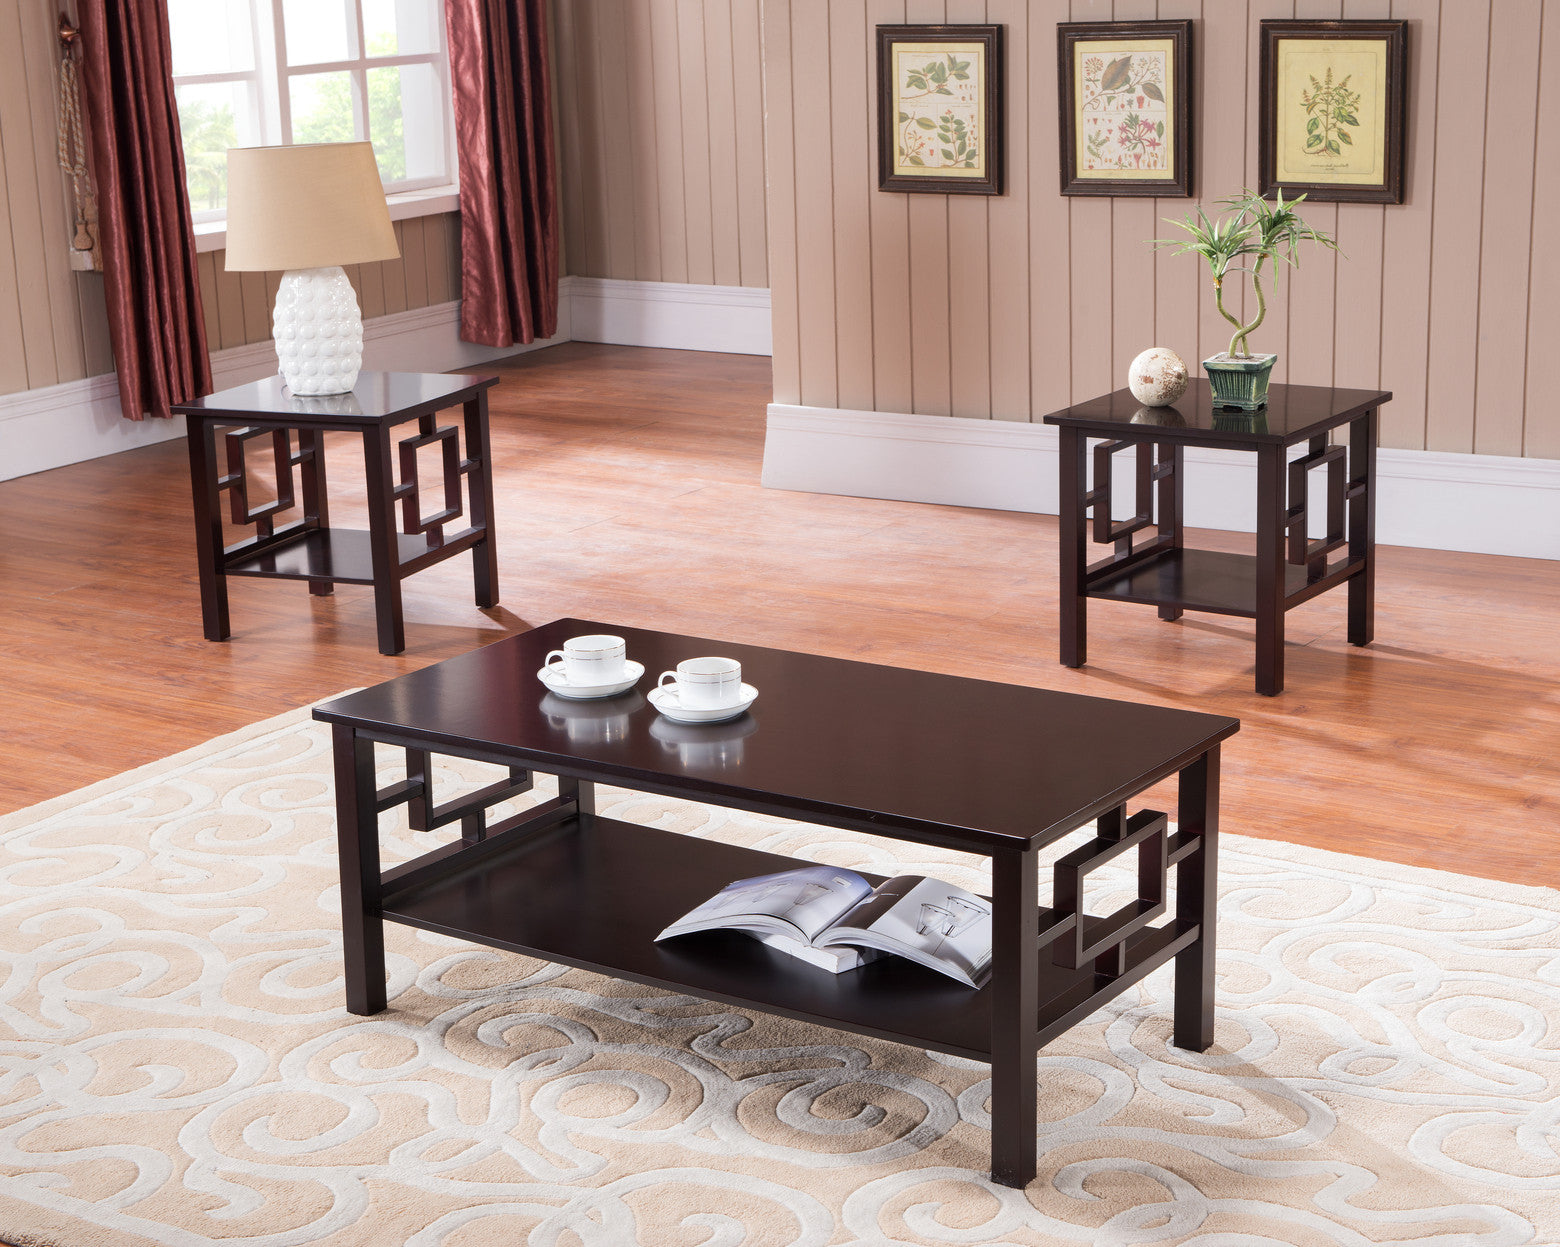 3 Coffee Table Set For Living Room